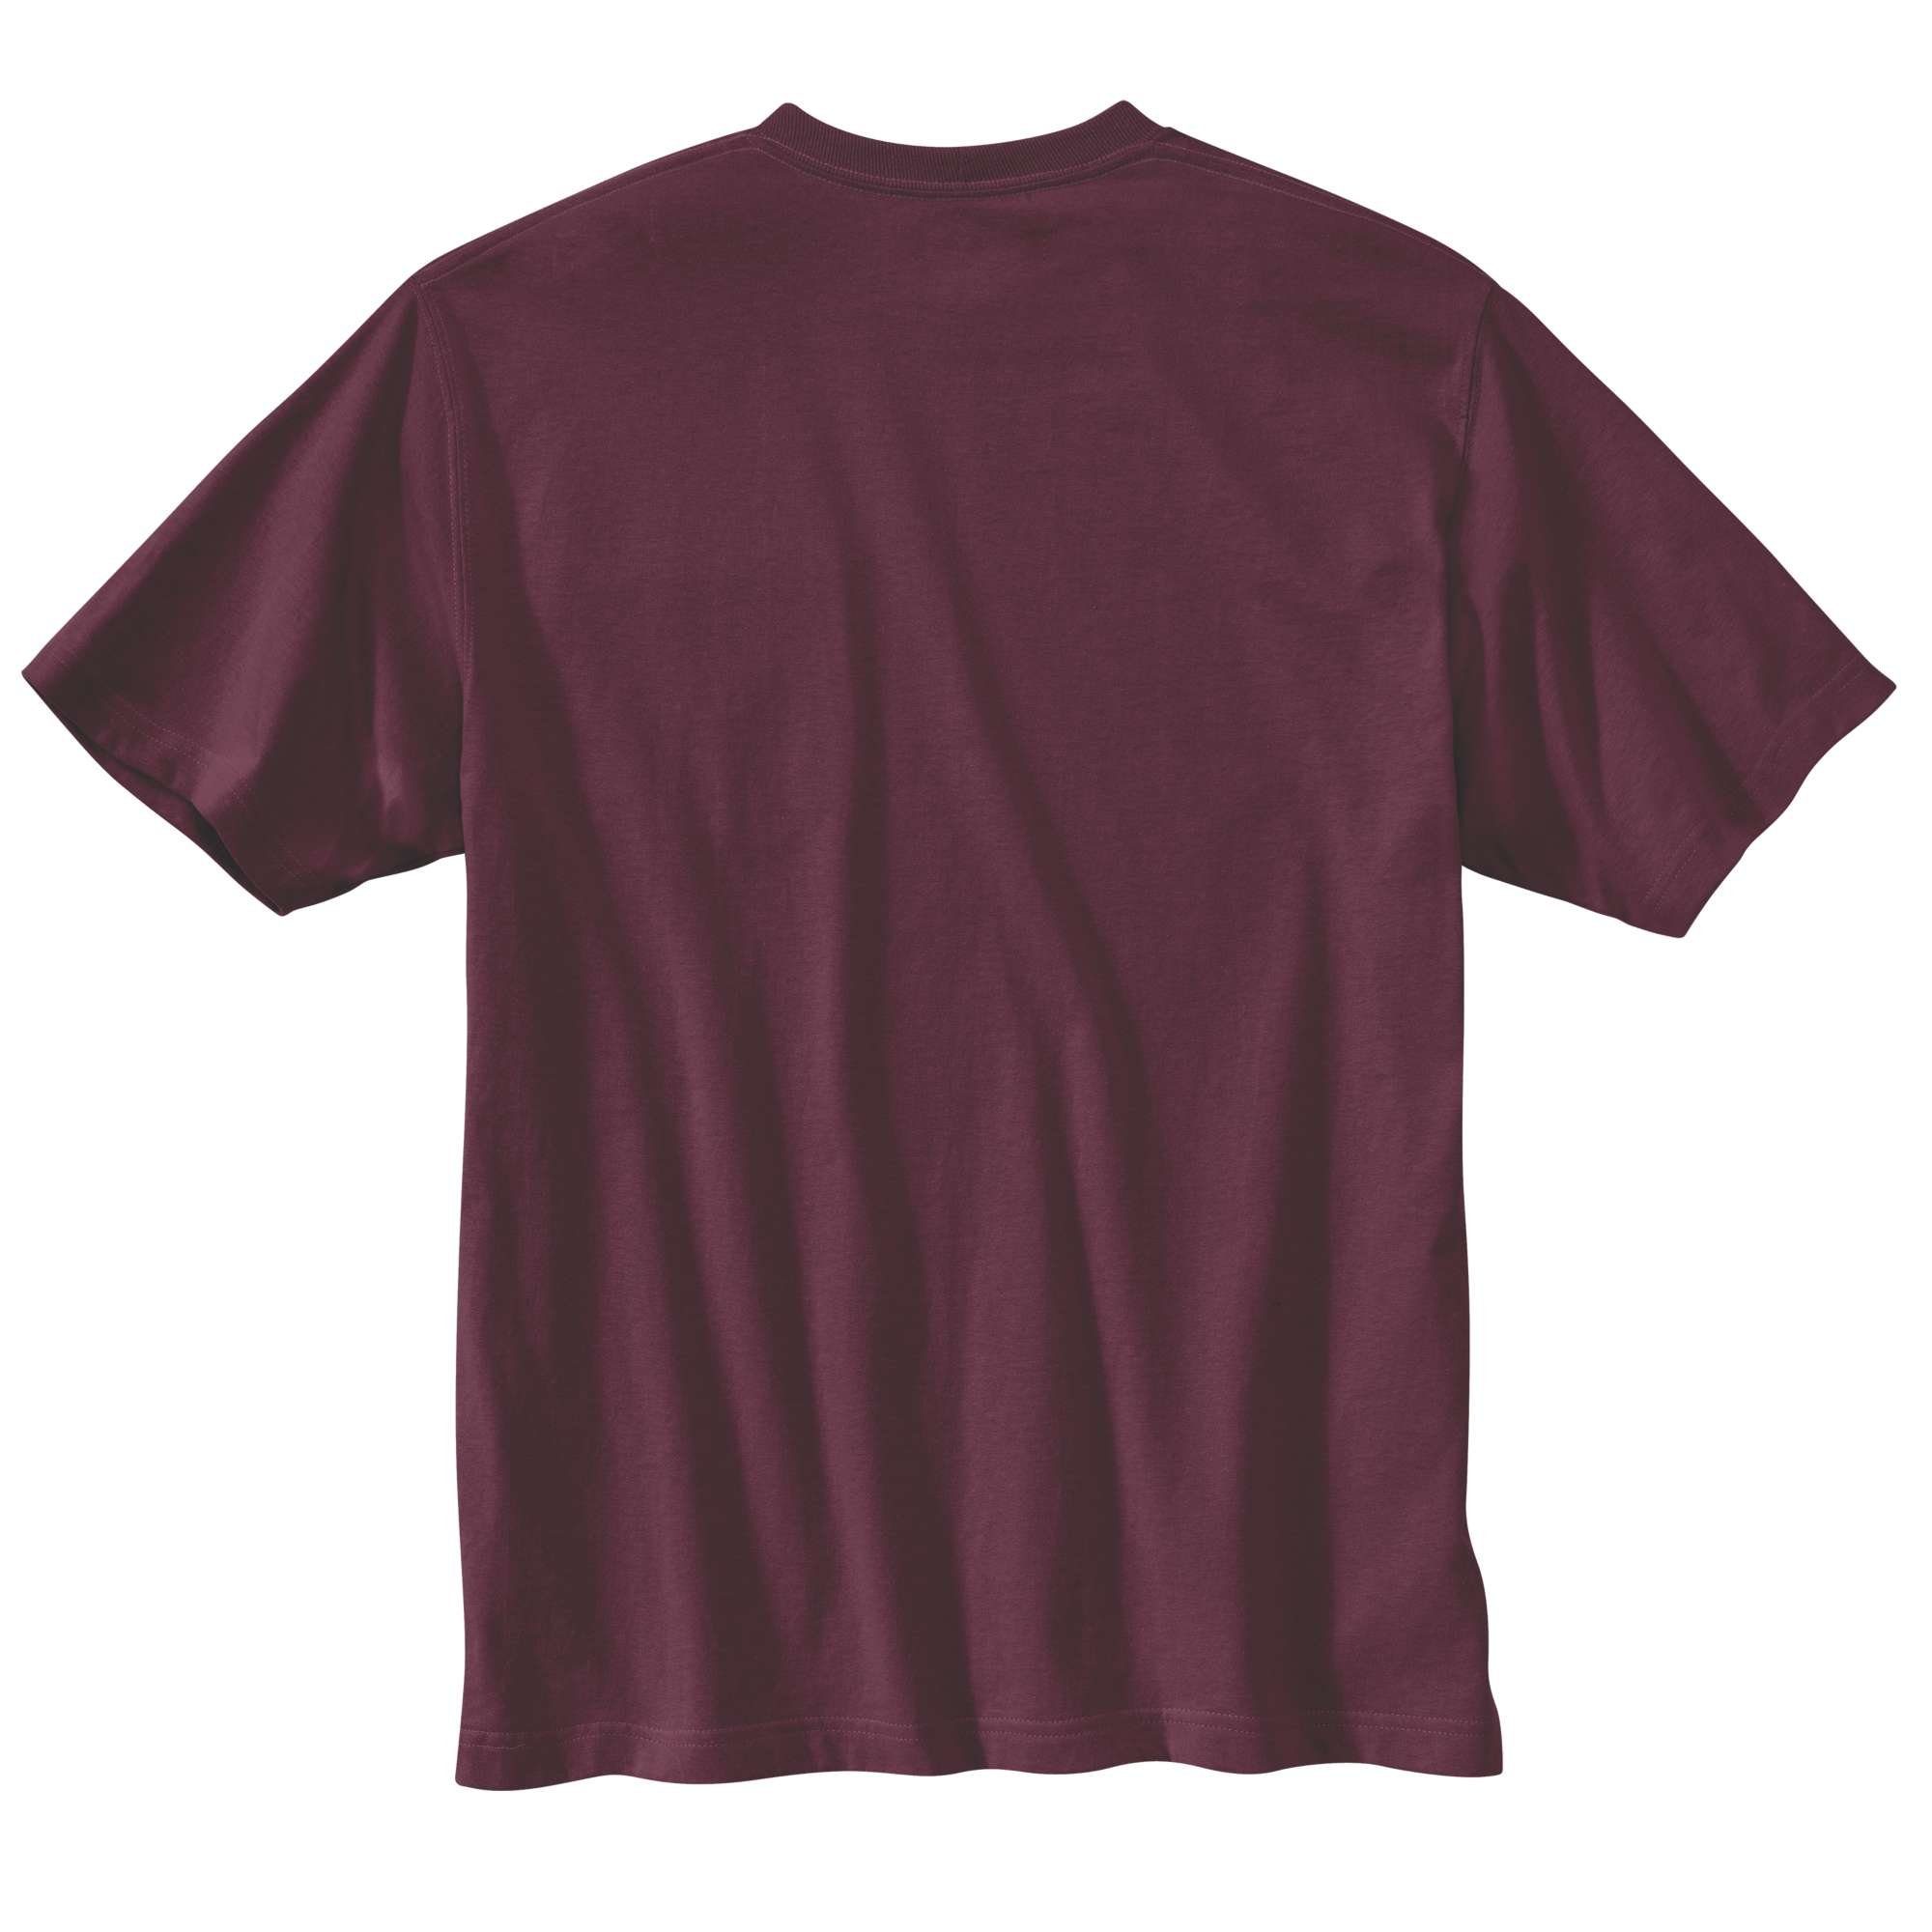 Craft Fit T-Shirt Relaxed Graphic, Port Fit Relaxed Carhartt